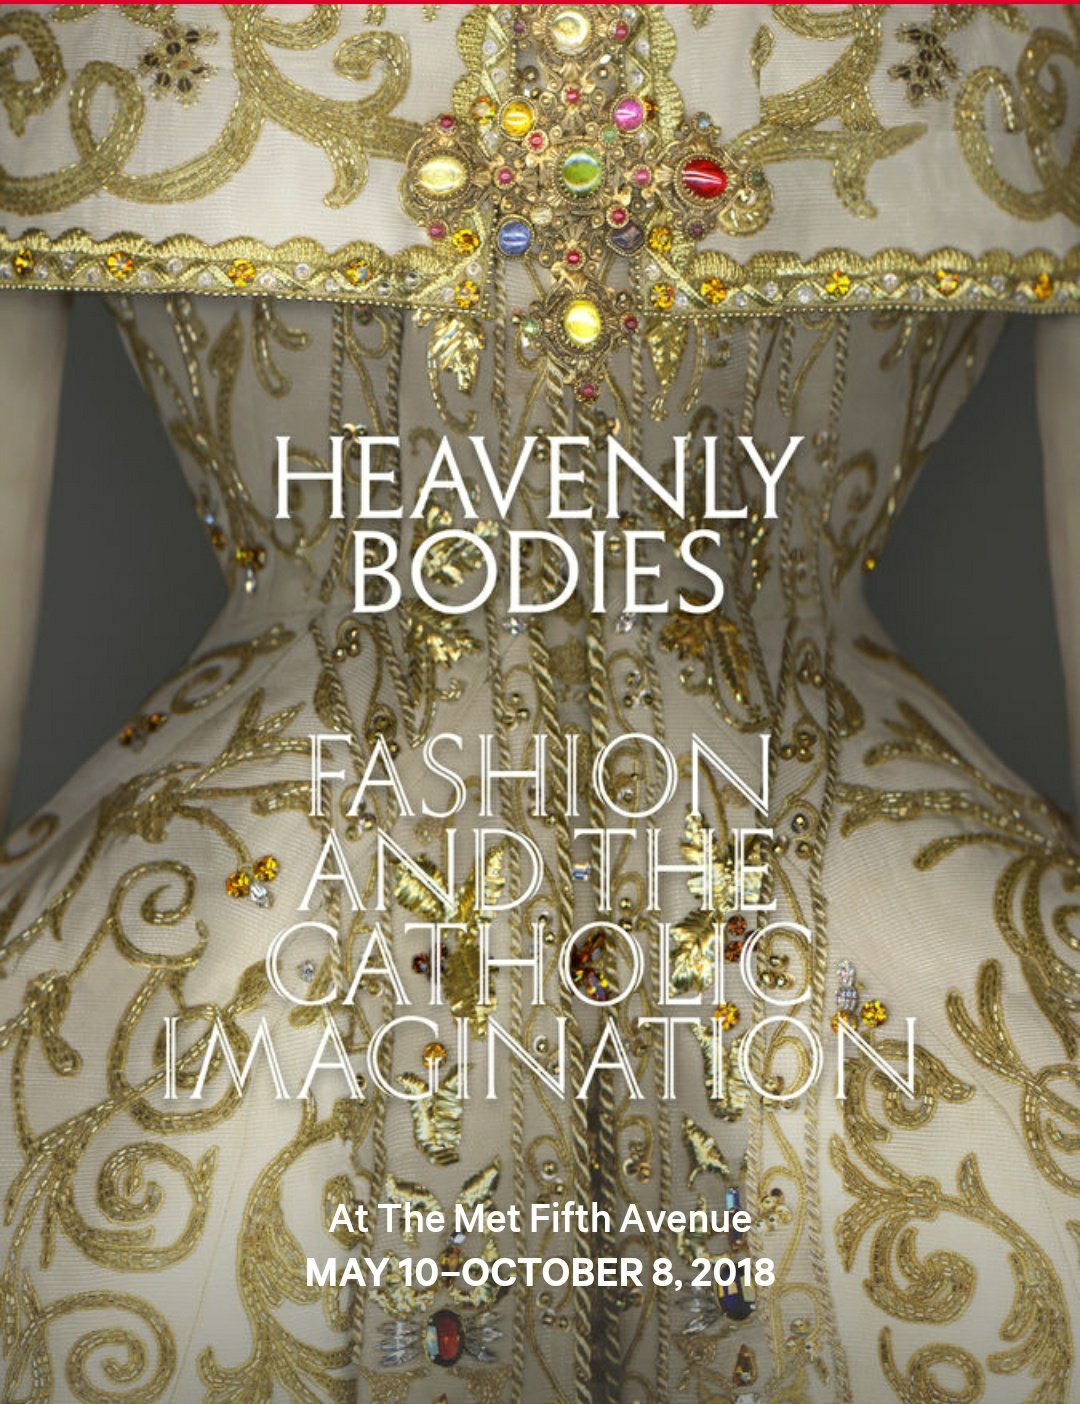 Heavenly Bodies _ Fashion and the Catholic Imagination 2018 Exhibition at the Met Cloisters on The Pillow Goddess blog!